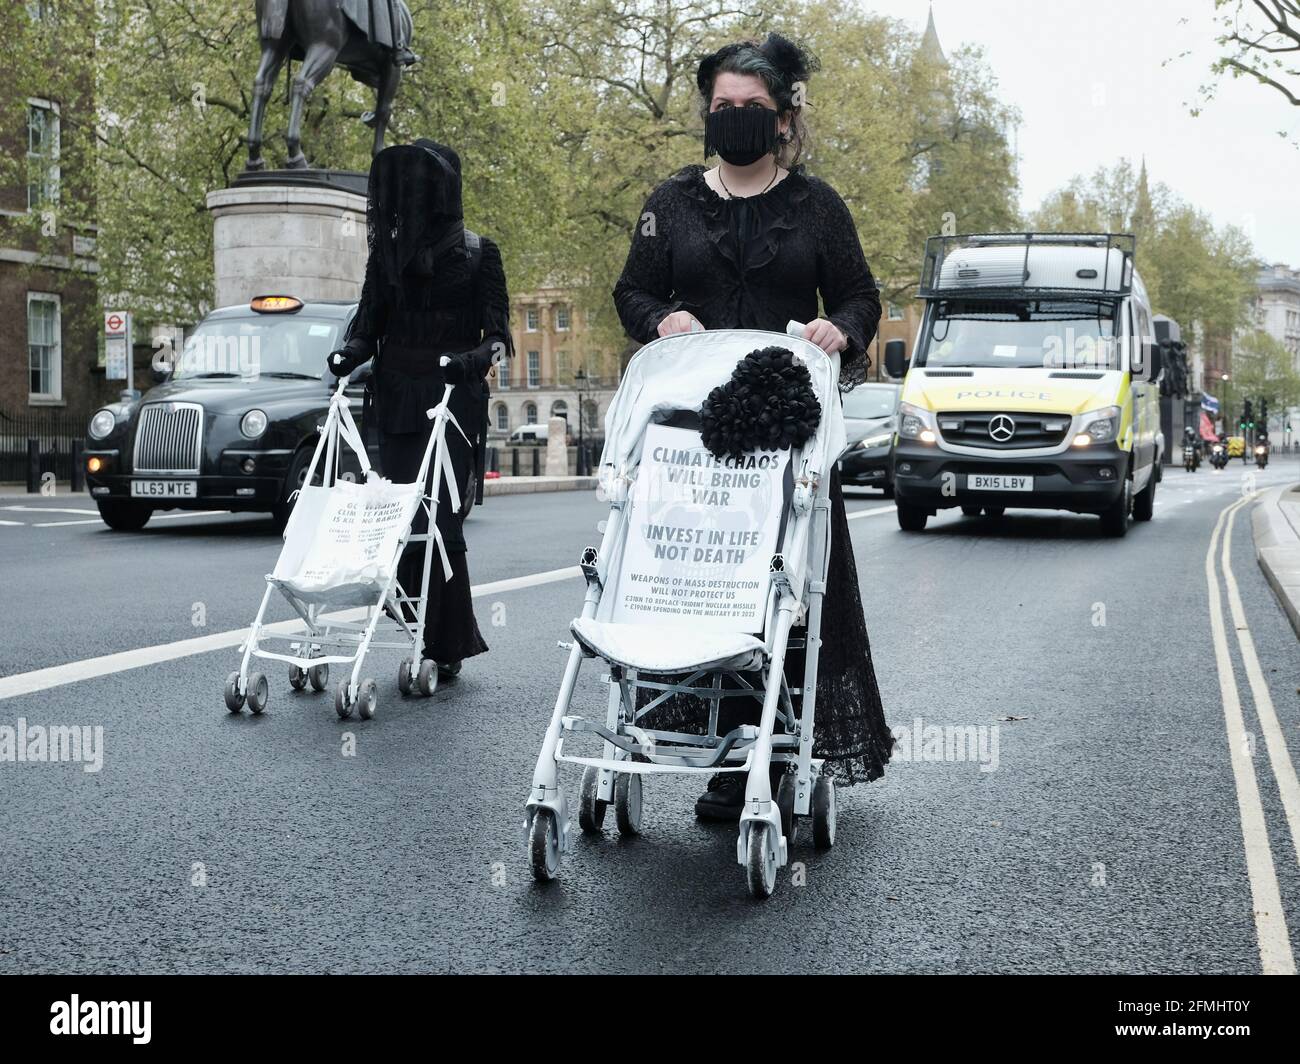 Extinction Rebellion stage a demonstration in central London to highlight government inaction over climate change failing children. Stock Photo